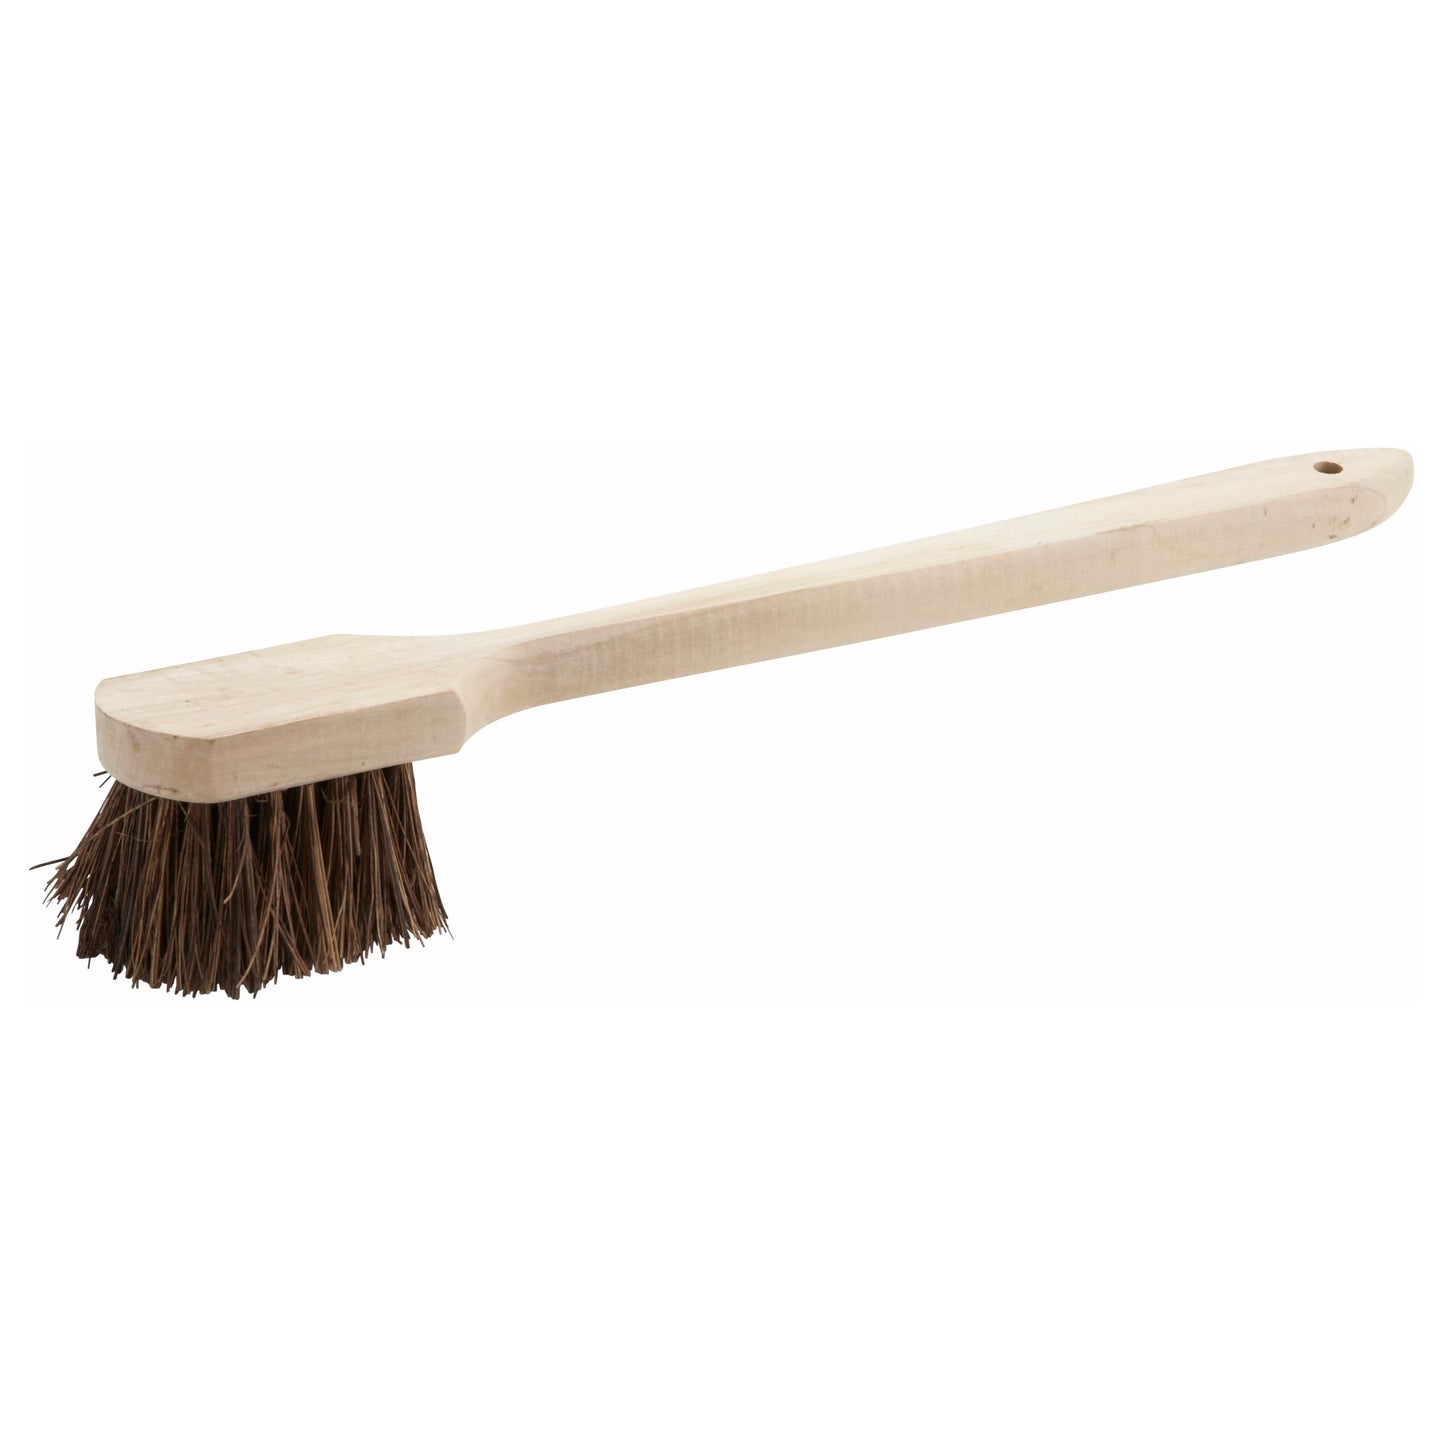 BRP-20 - Pot Brush with Wooden Handle - 20"